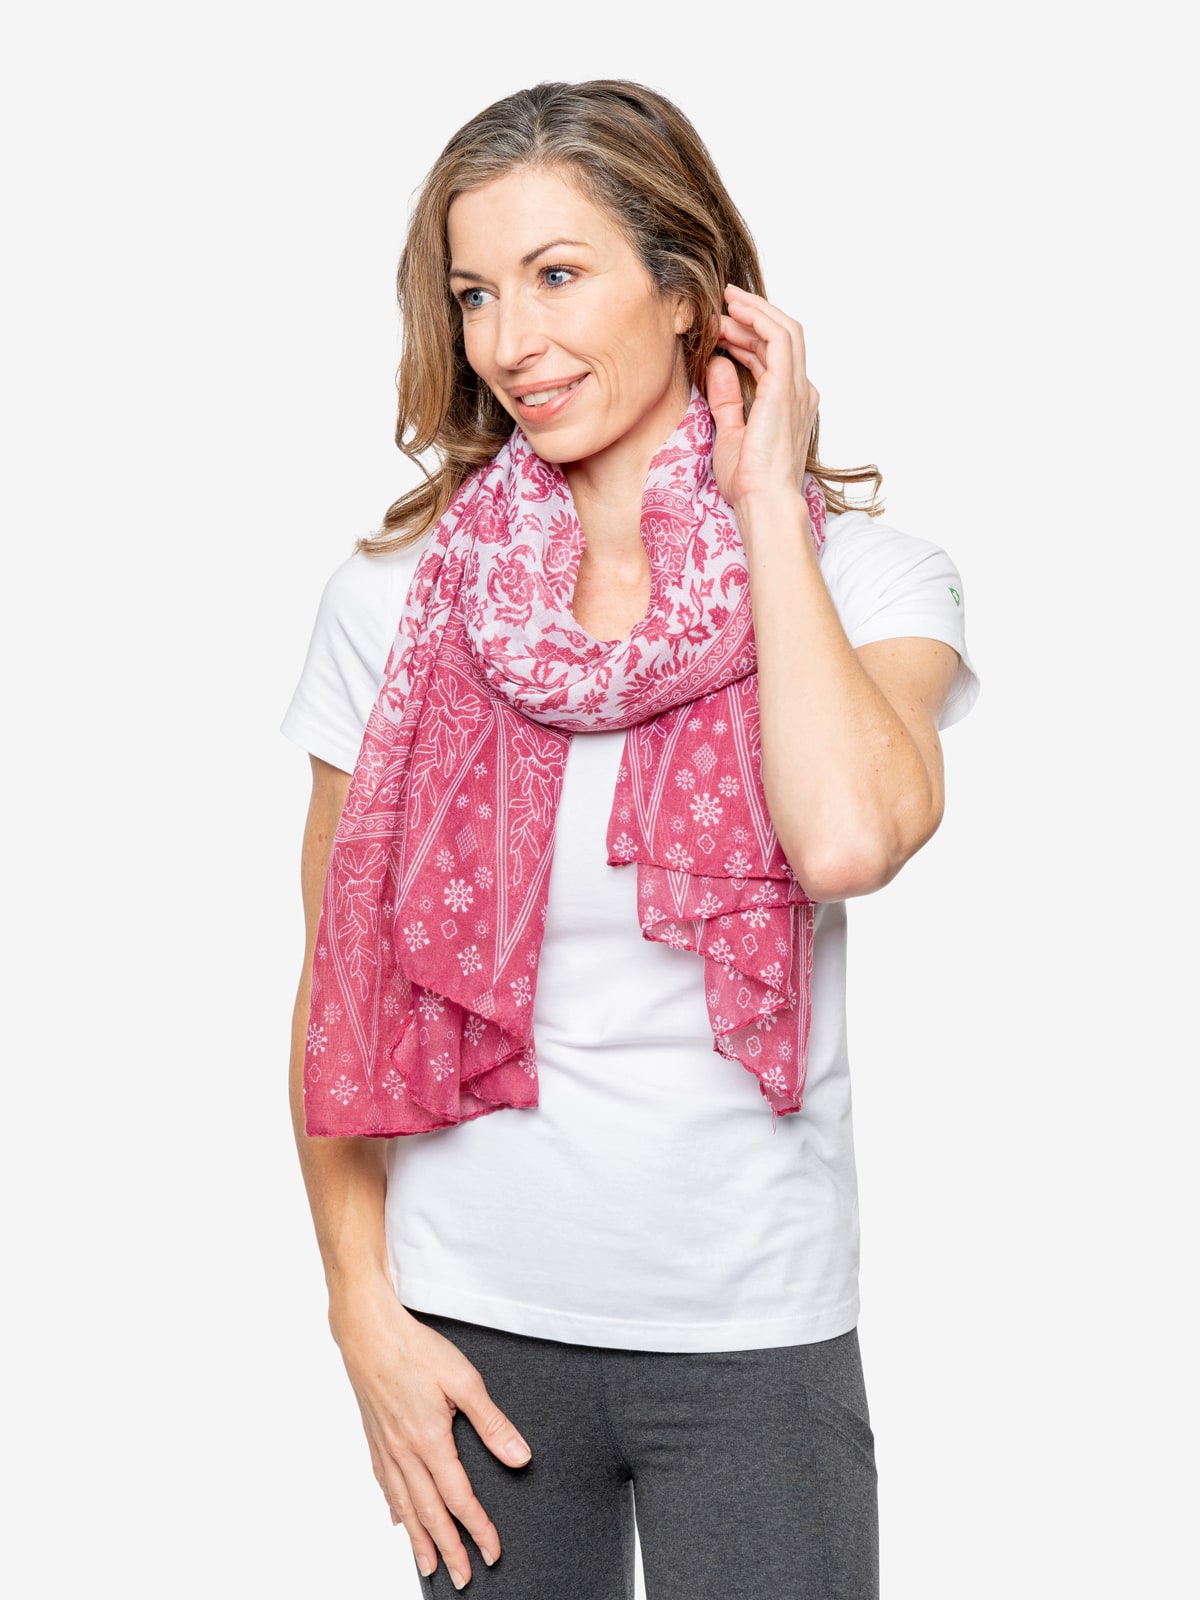 Insect Shield Versatile Wrap Scarf